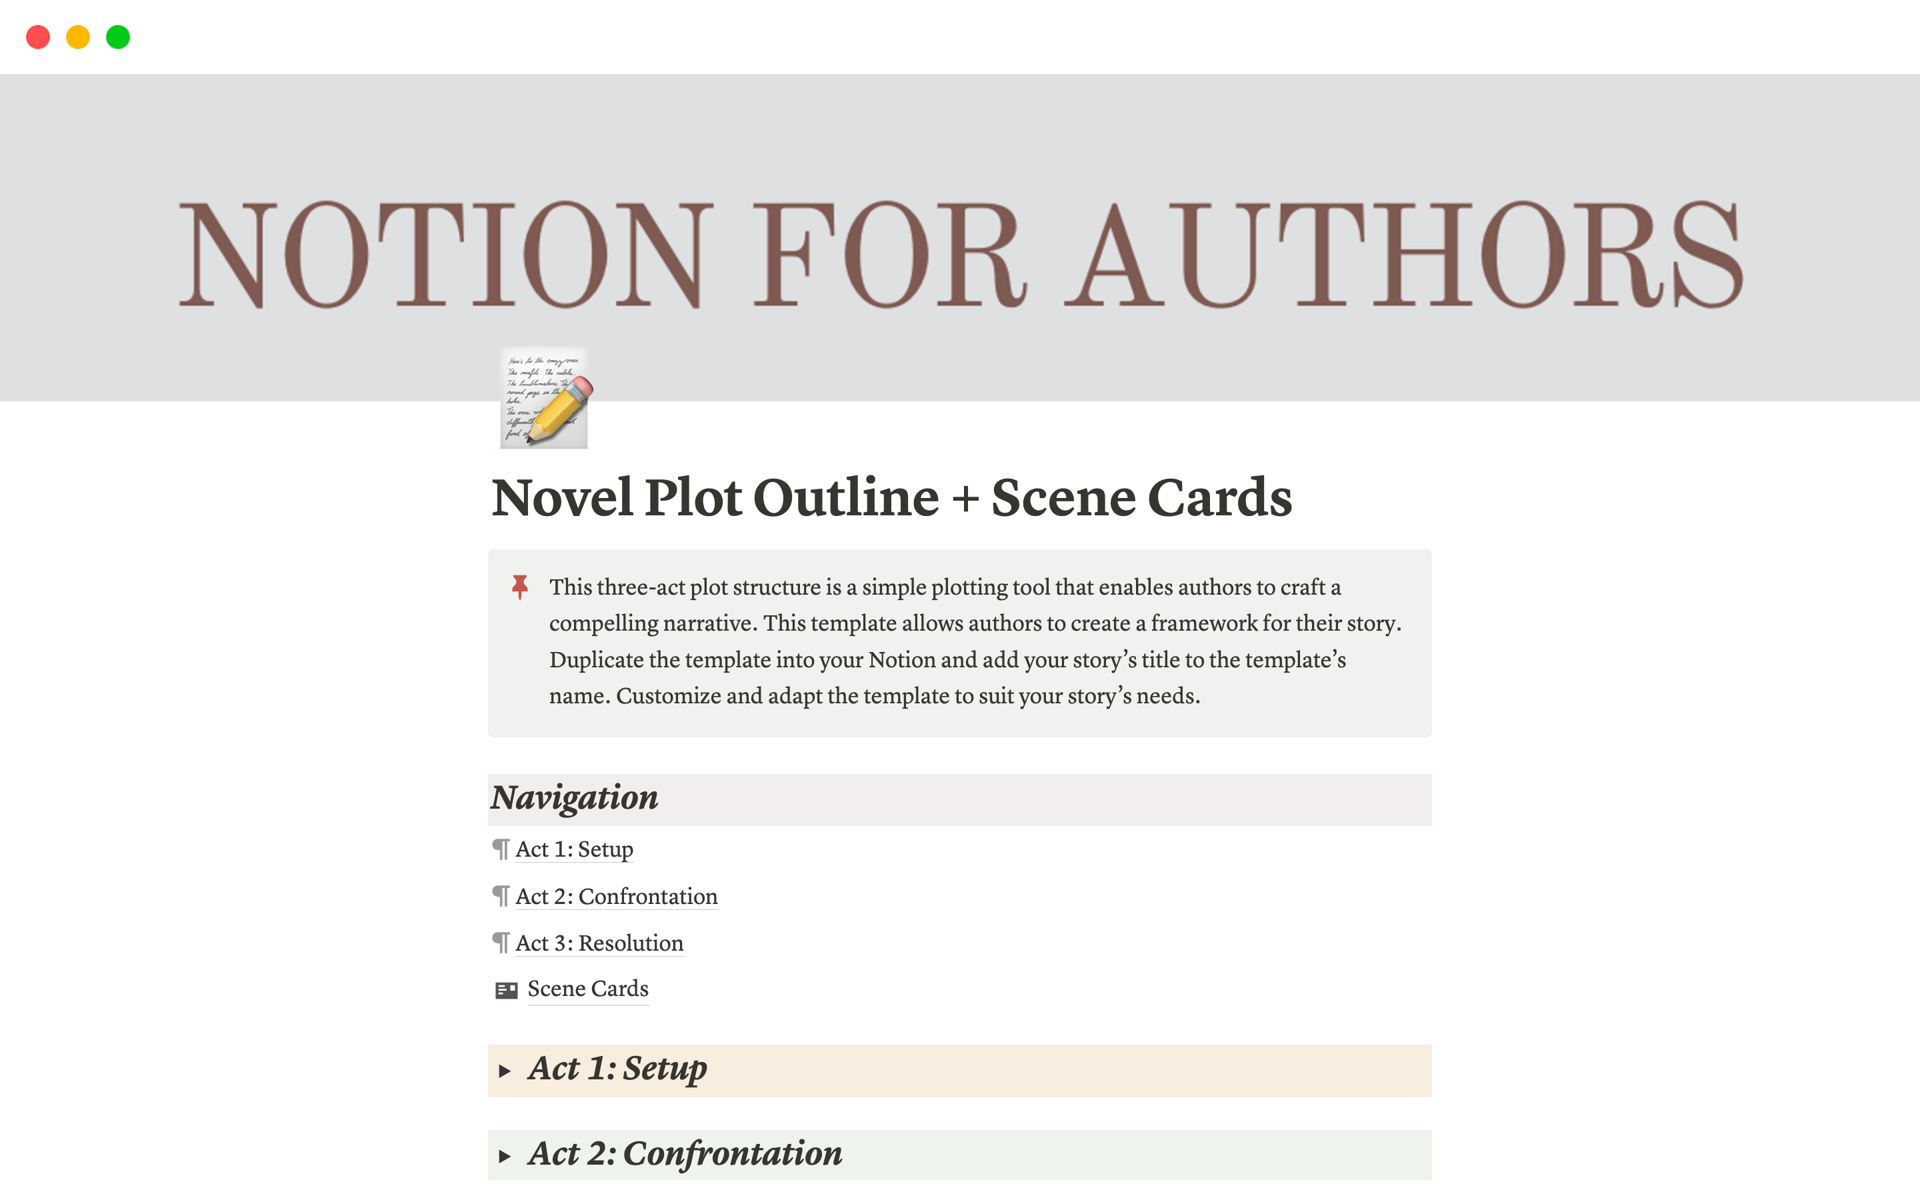 This template is designed to act as a guide to enable authors seamlessly plot their novels and craft scenes.